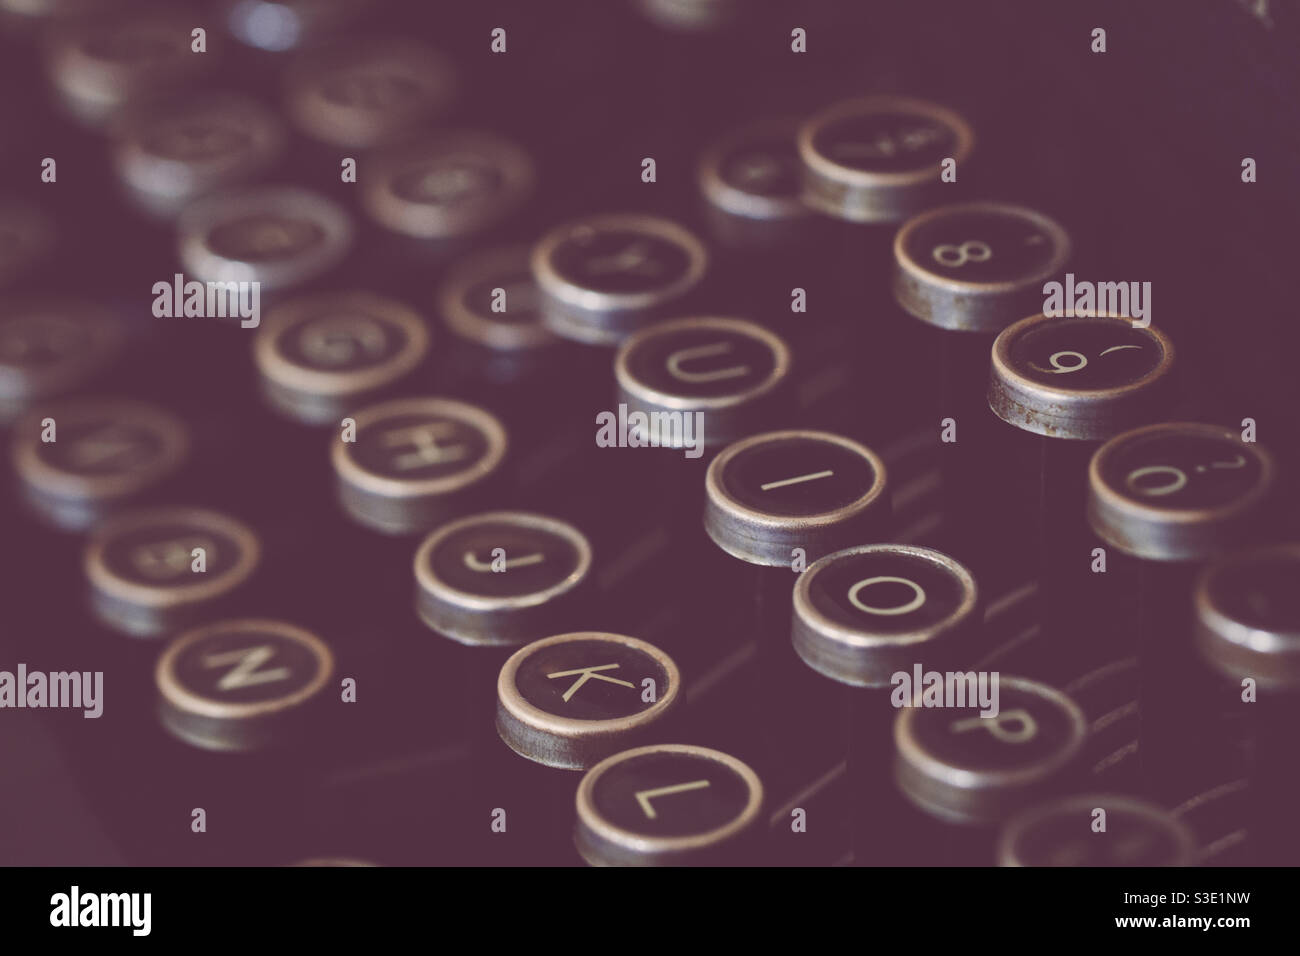 Close up of the round letter keys of an antique or old fashioned typewriter Stock Photo